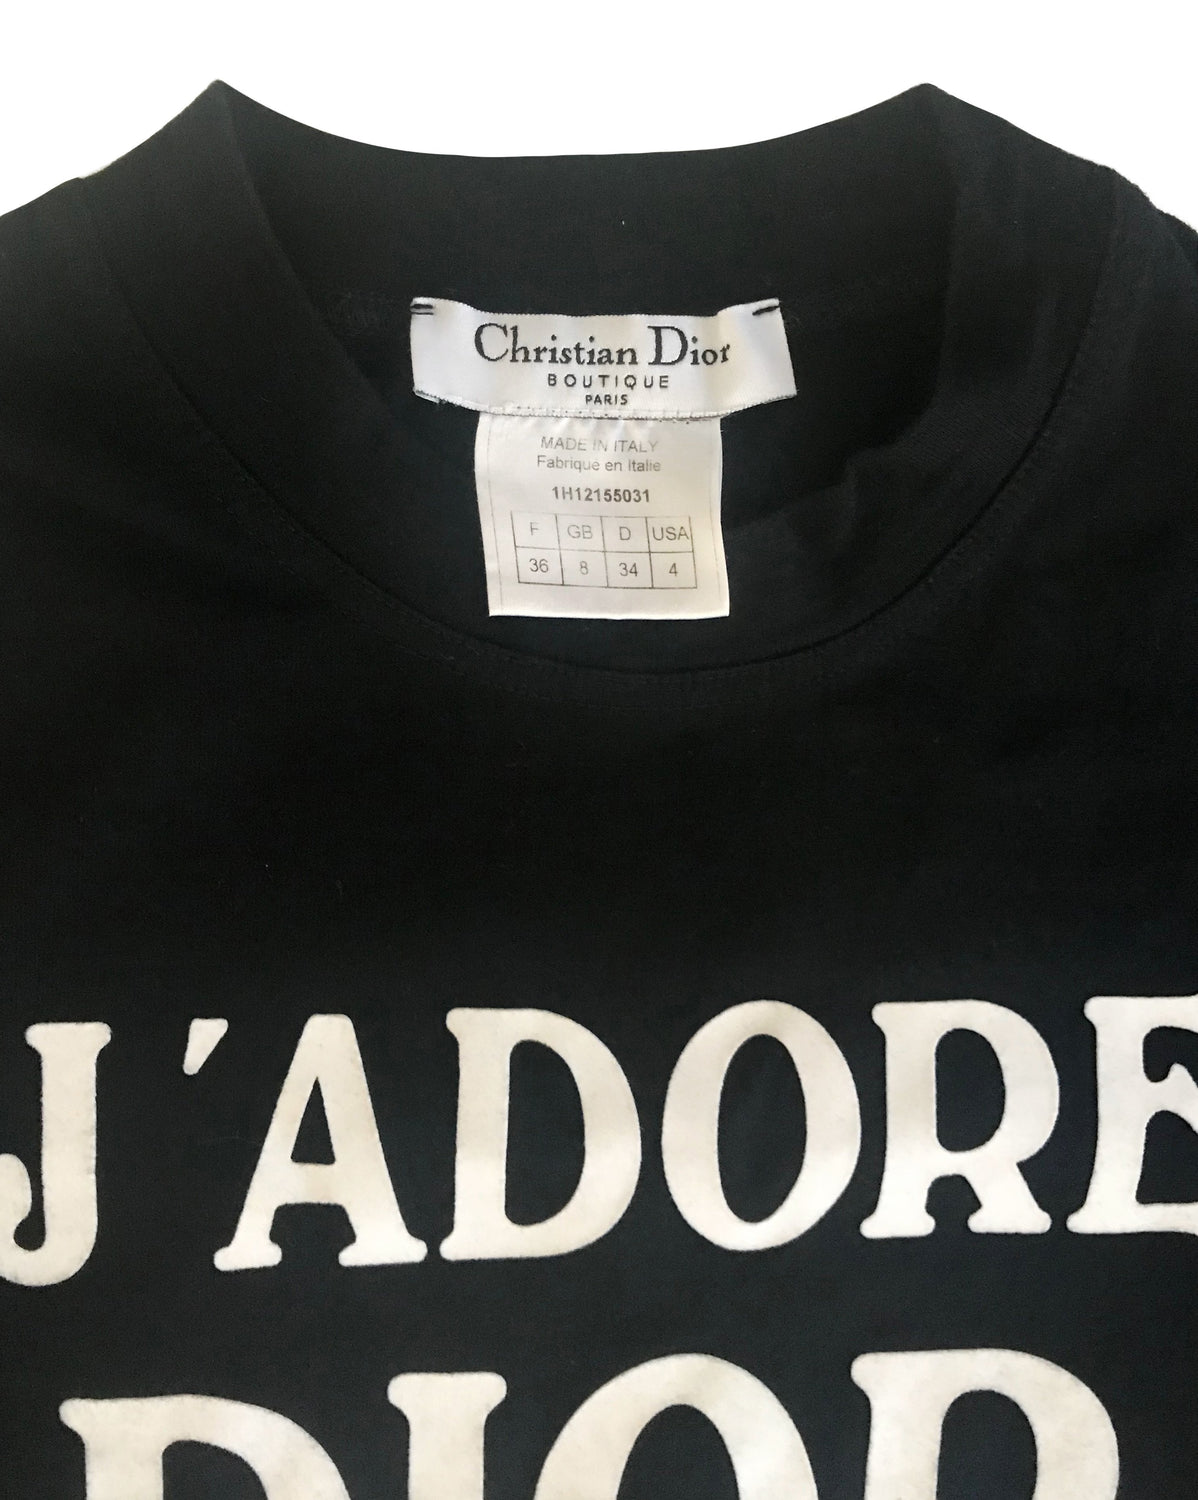 Fruit Vintage Christian Dior Black and White J'adore Dior long sleeve top by John Galliano. Features a classic crew cut and flocked logo print detailing in white front and back, as seen on Sex and the City and Khloe Kardashian.